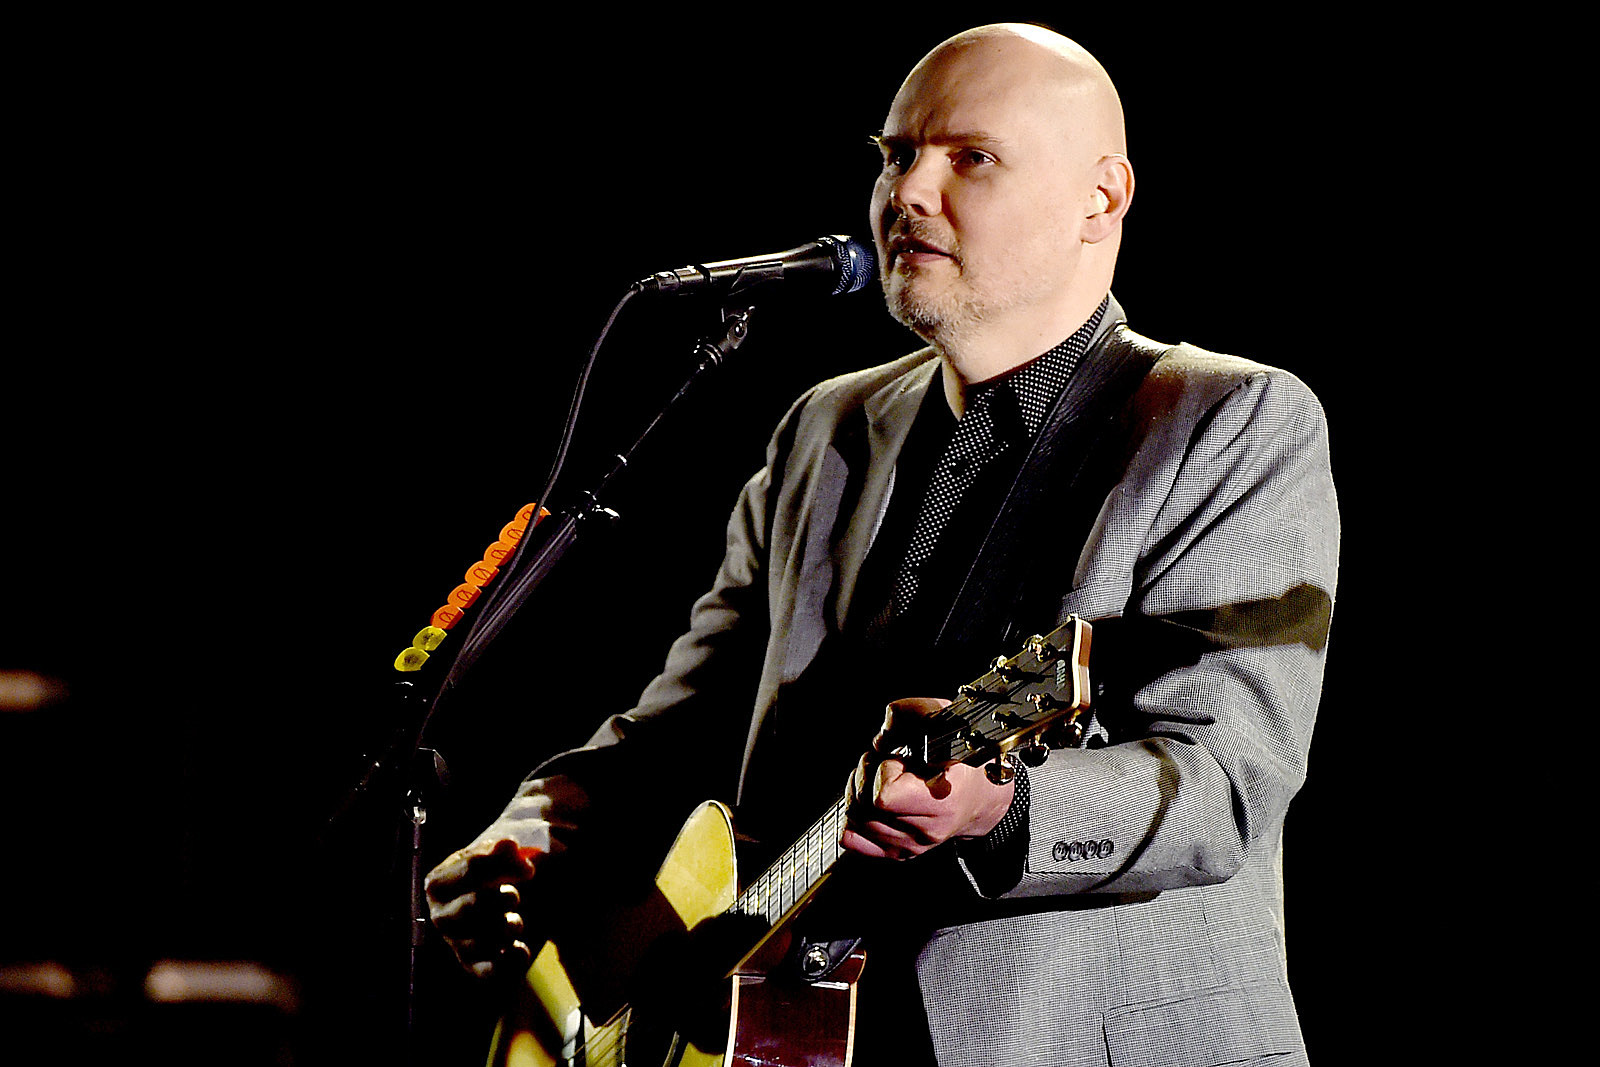 The Story of When Smashing Pumpkins' Jonathan Melvoin Died